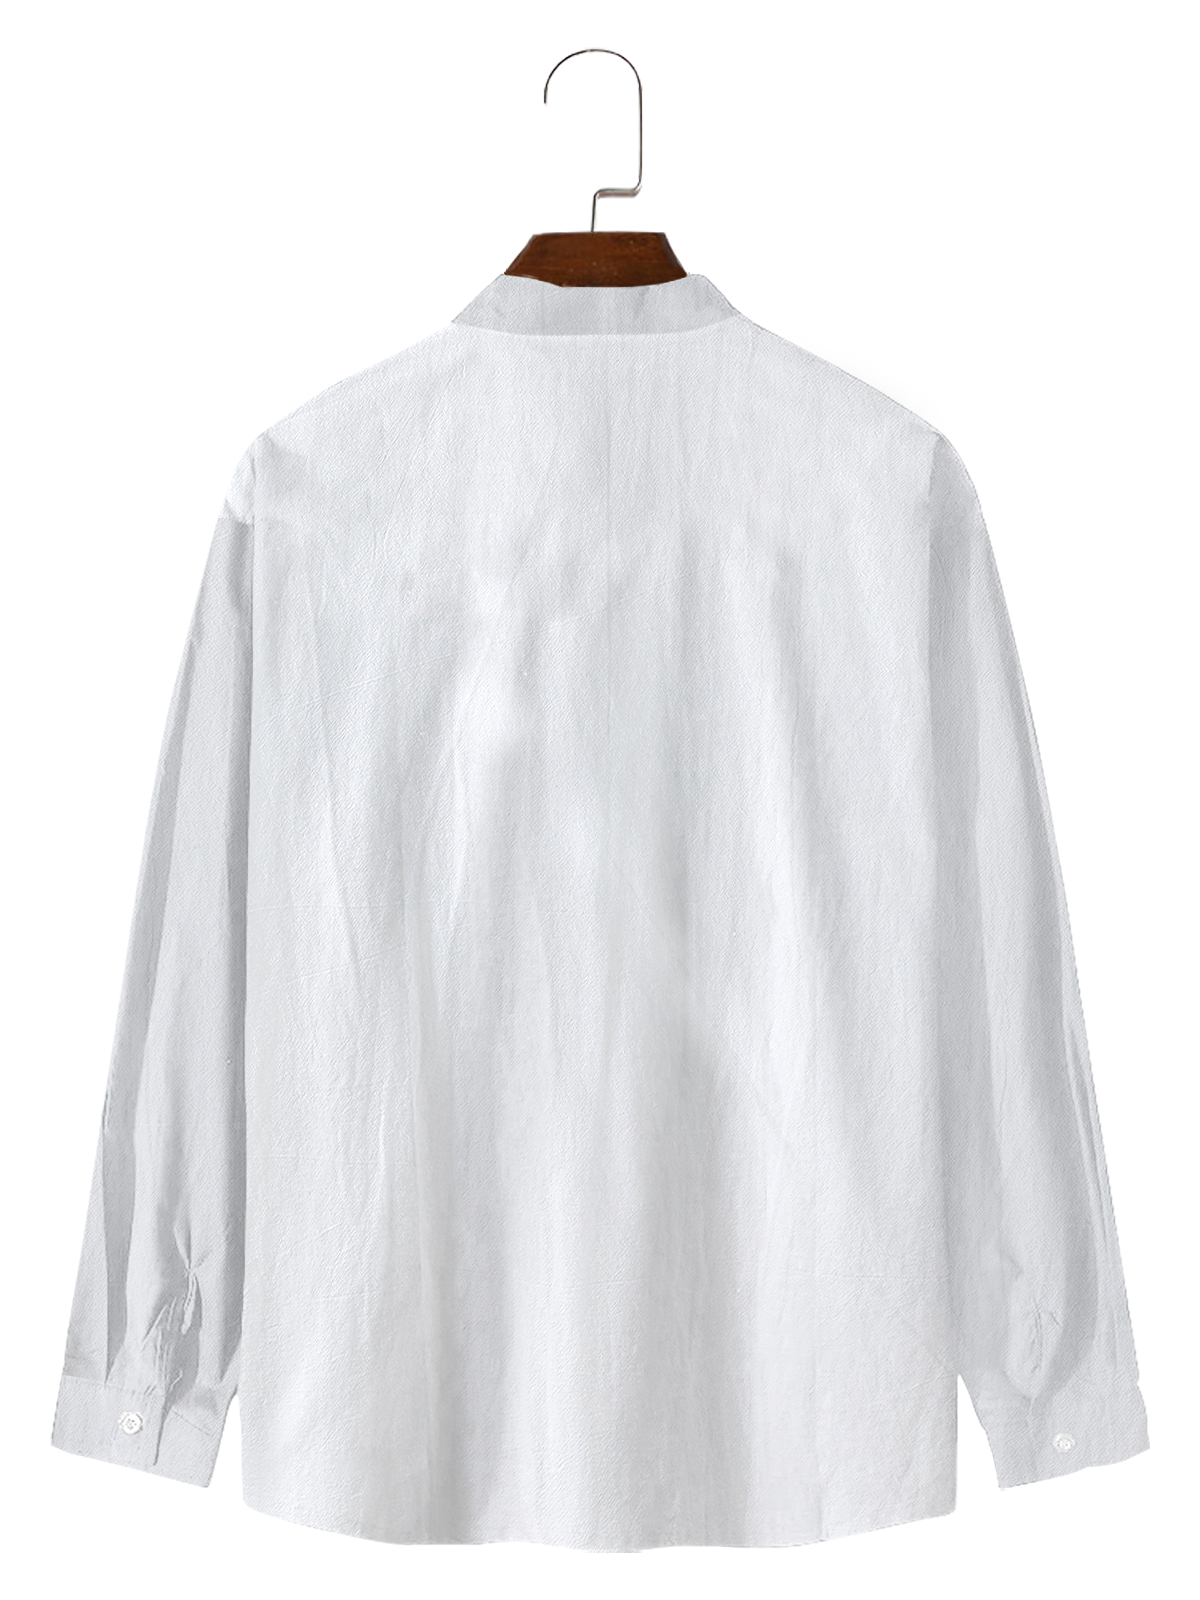 n style casual geometric embroidered long sleeved linen shirt in cotton and linen style